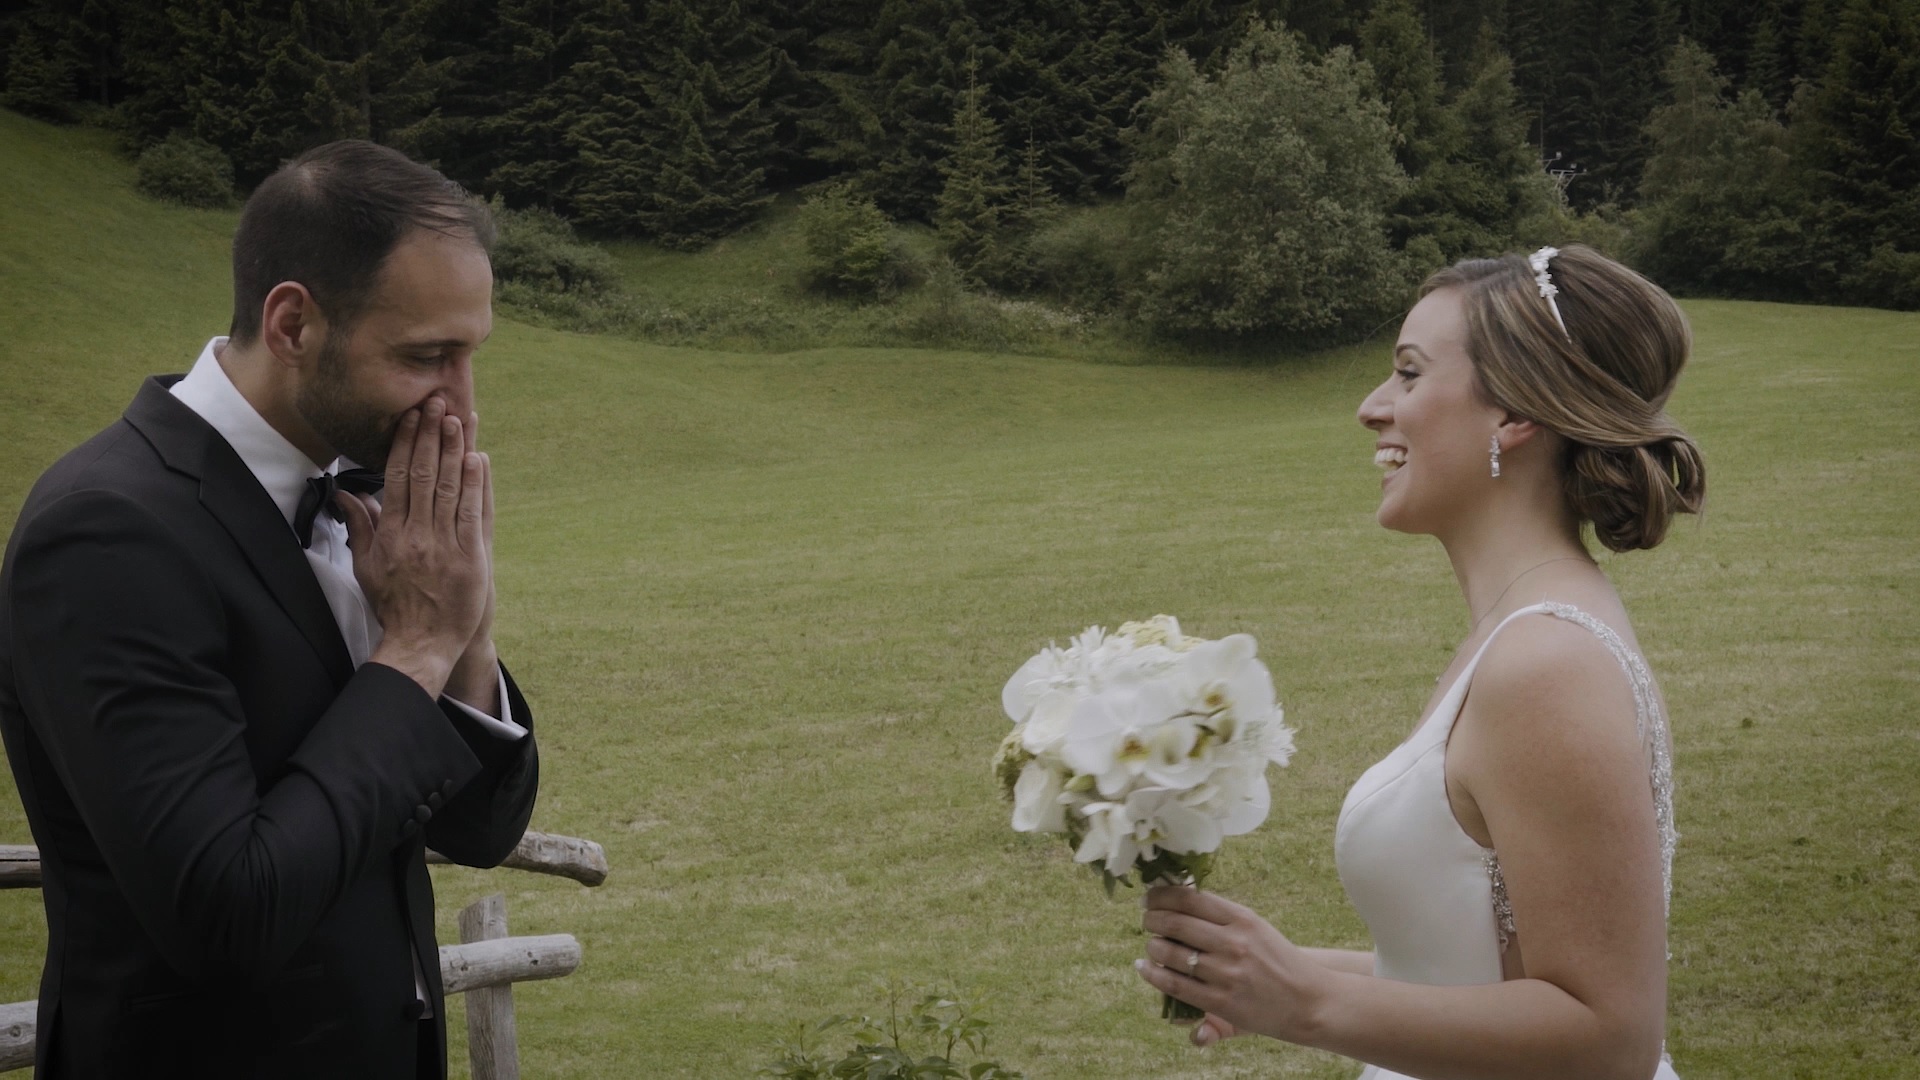 Destination wedding in the Dolomites: from USA to Italy